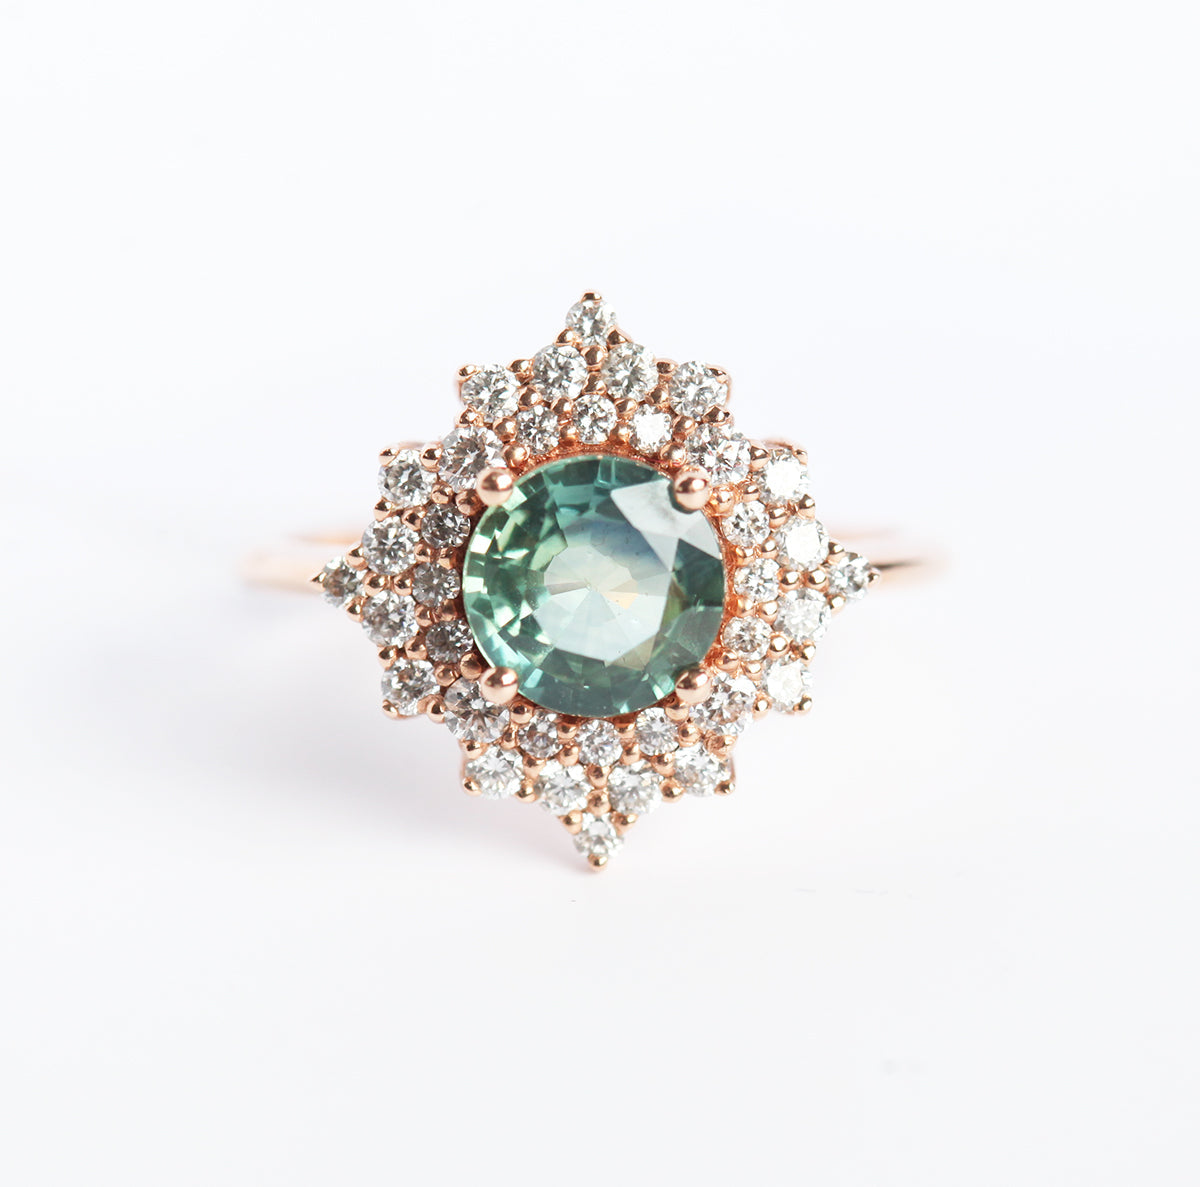 Round teal sapphire ring with diamond halo